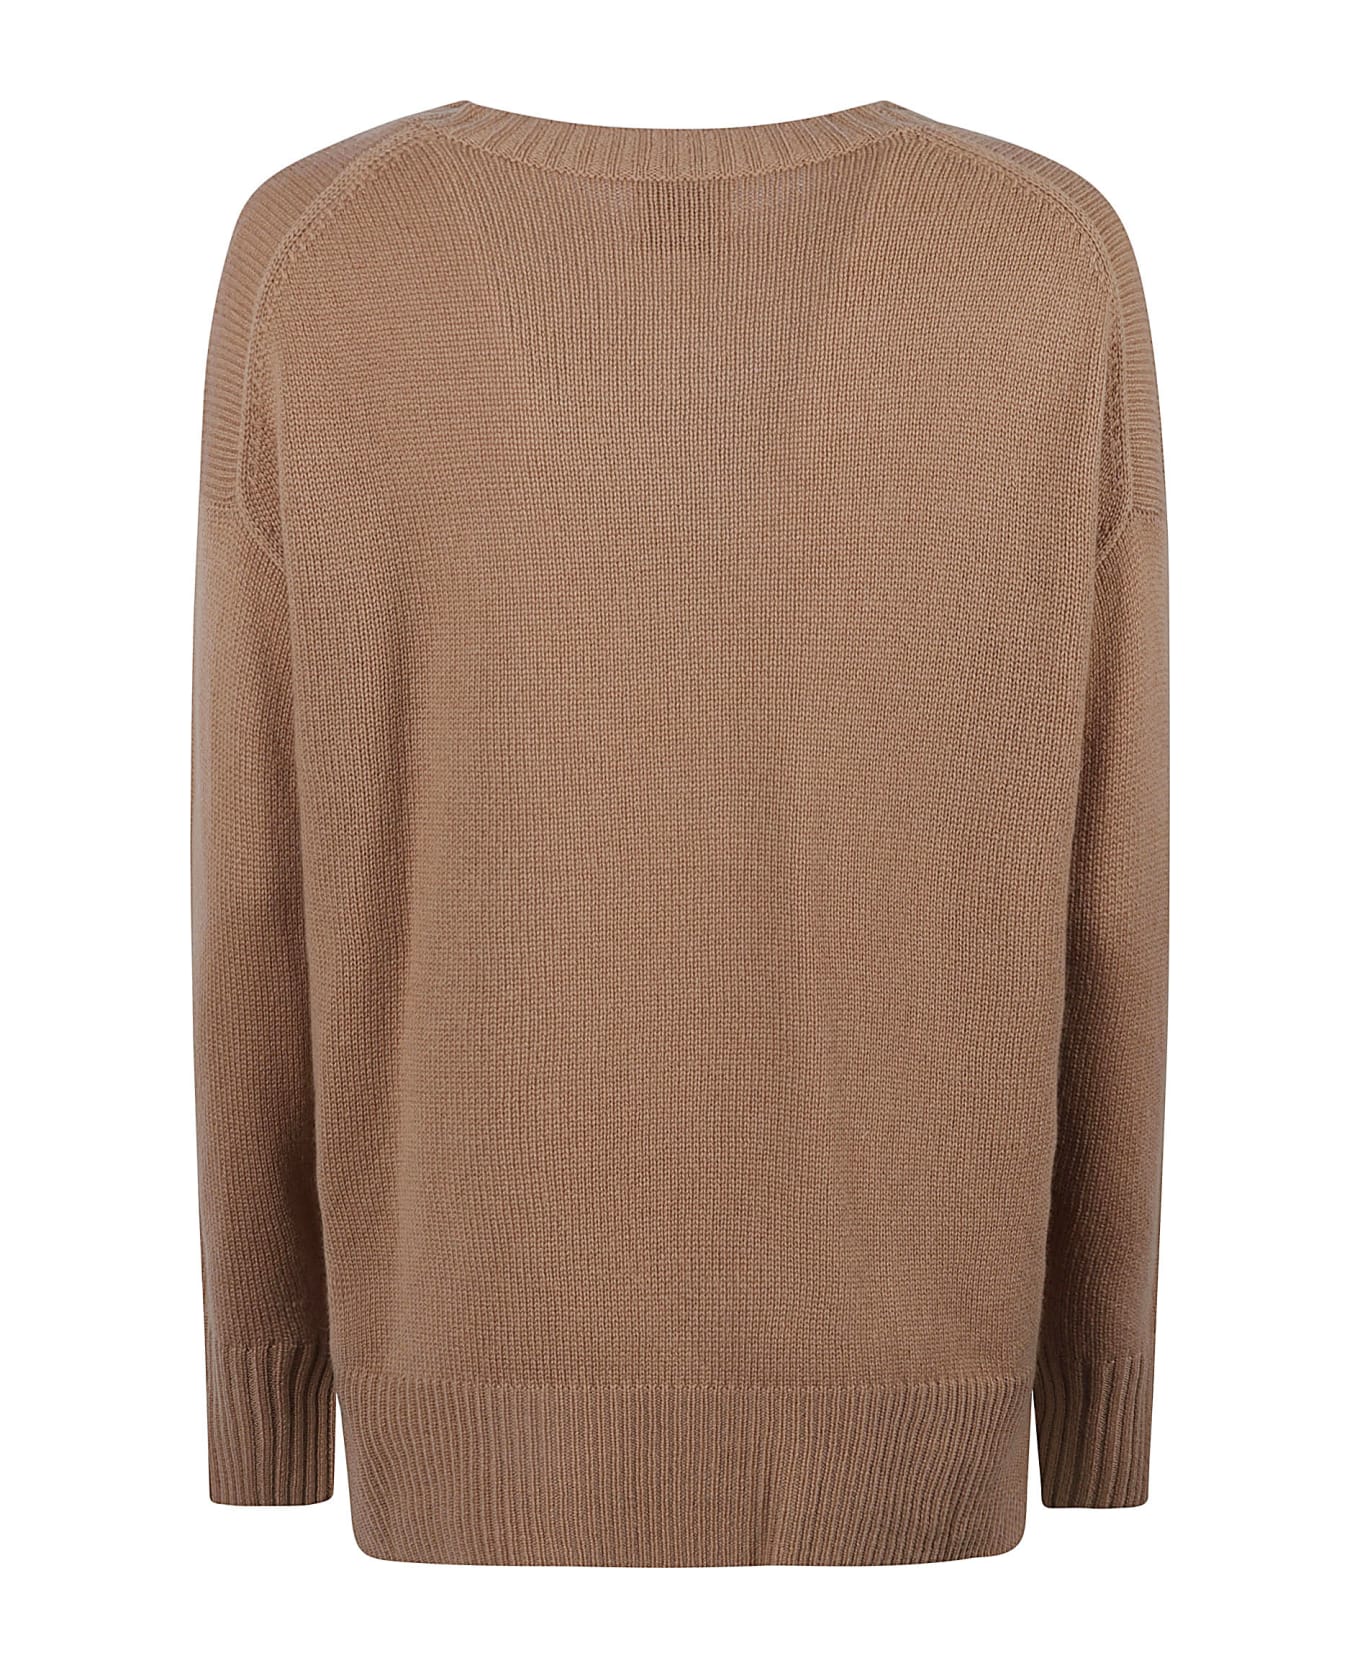 Allude Loose Fit Side Slit Knit Sweater - BROWN